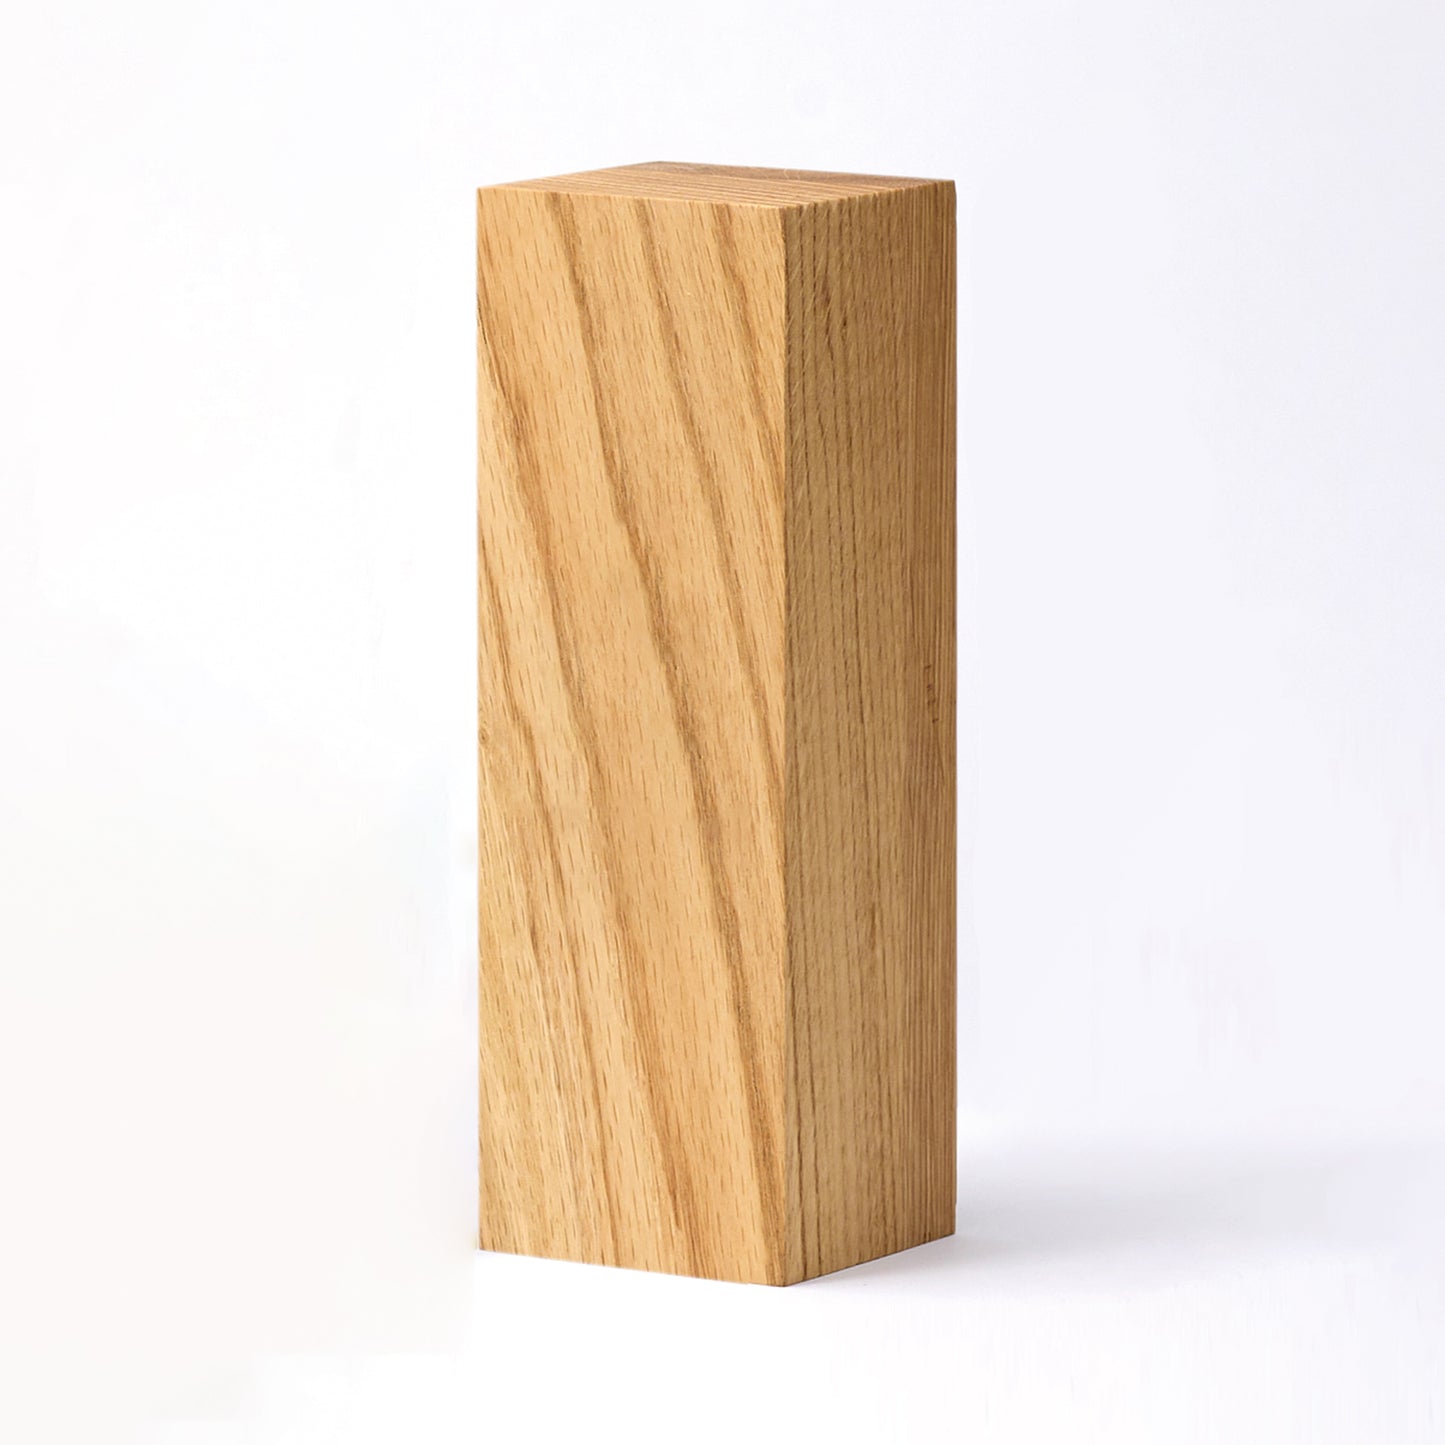 Wooden Beech Square Column Trophy - Available in 3 Sizes